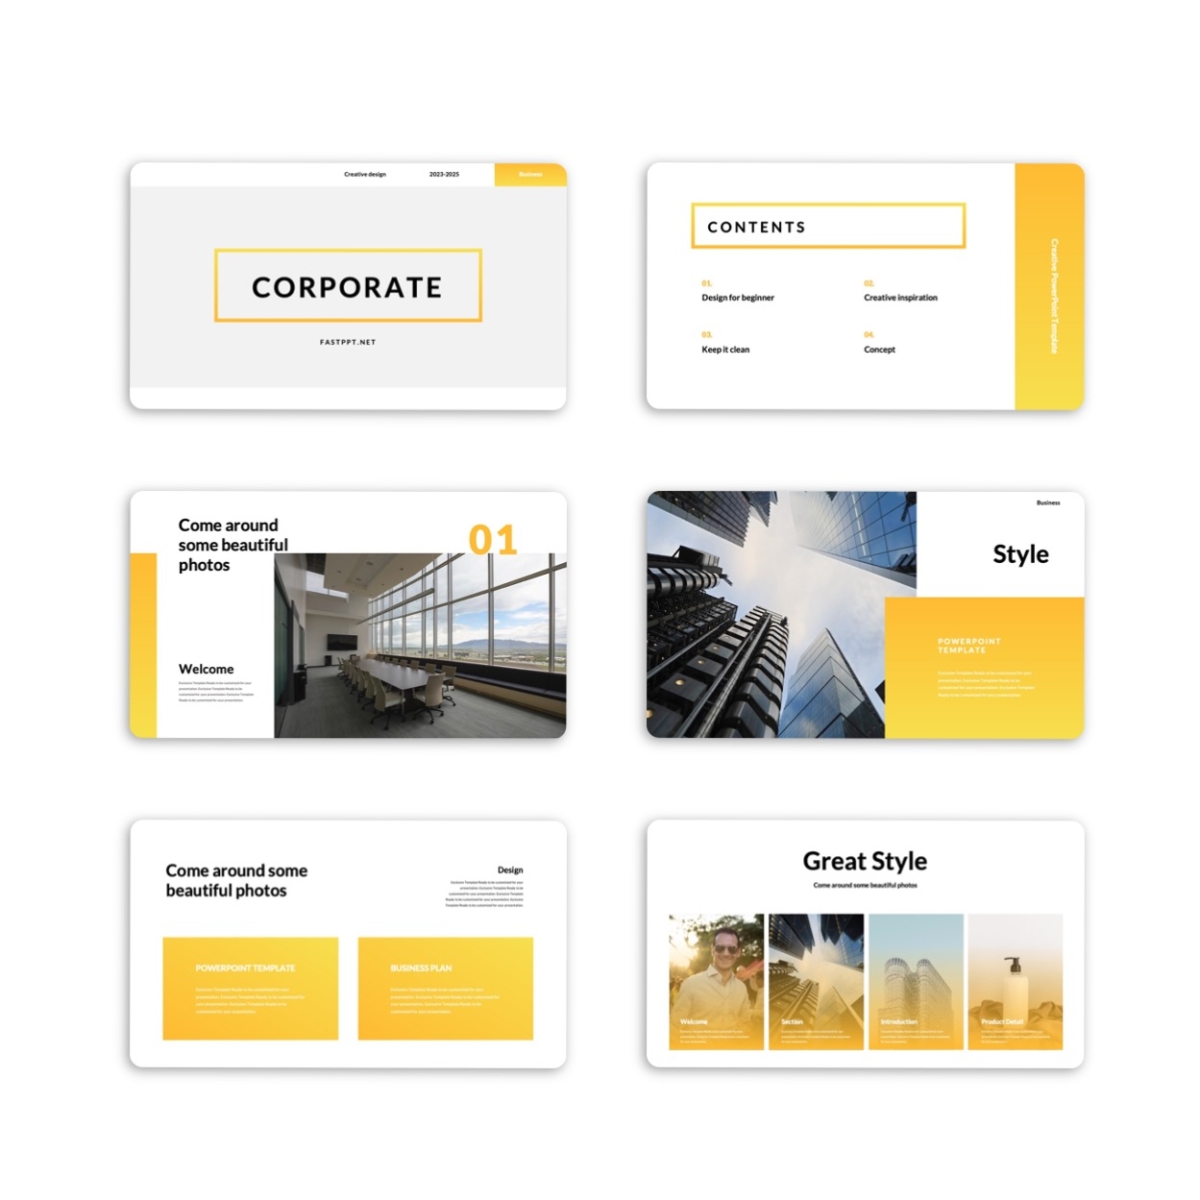 Google Slides-2 in 1 Corporate Professional PowerPoint Template